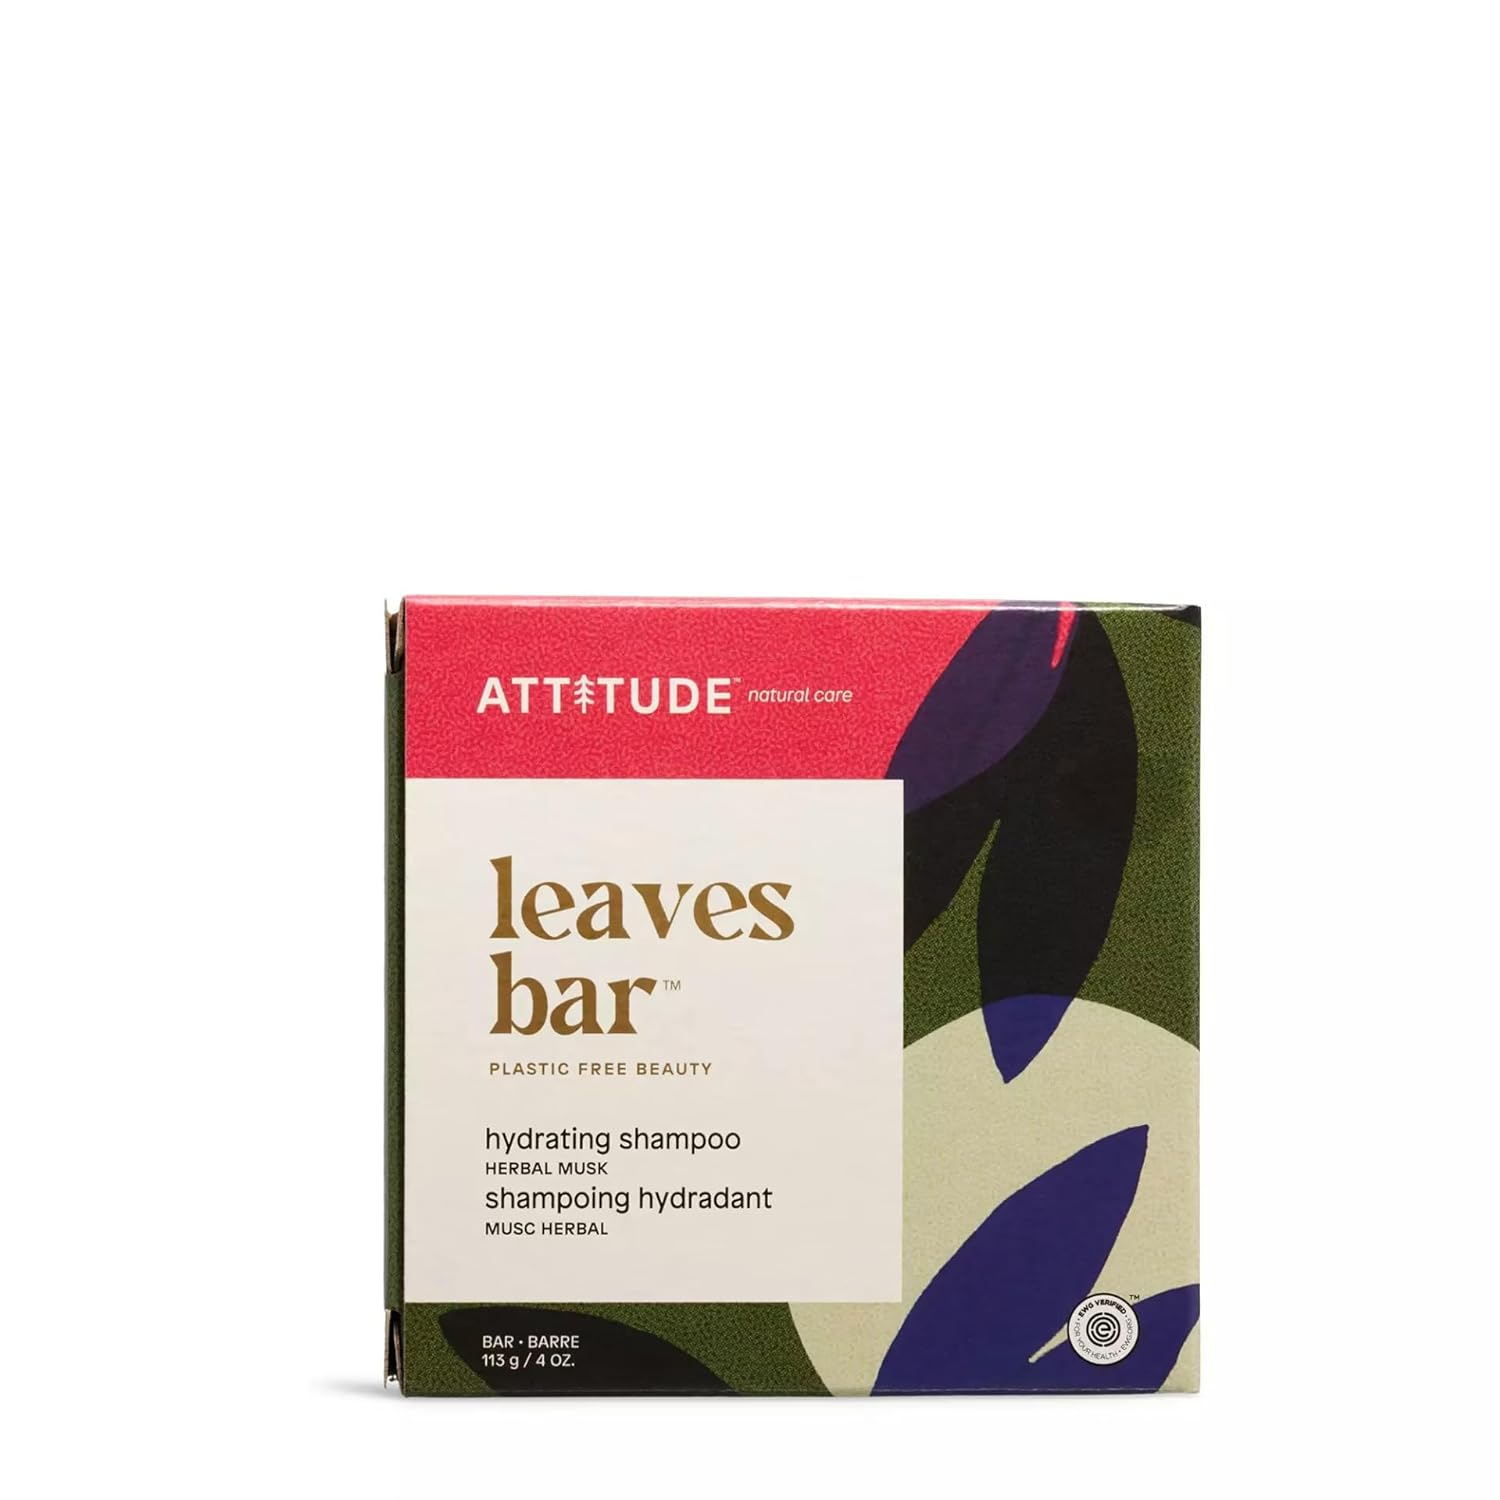 ATTITUDE Hair Shampoo Bar, Plant and Mineral-Based Ingredients, EWG Verified and Plastic-free Beauty Care, Vegan and Cruelty-free, Hydrating, Herbal Musk, 4 Oz